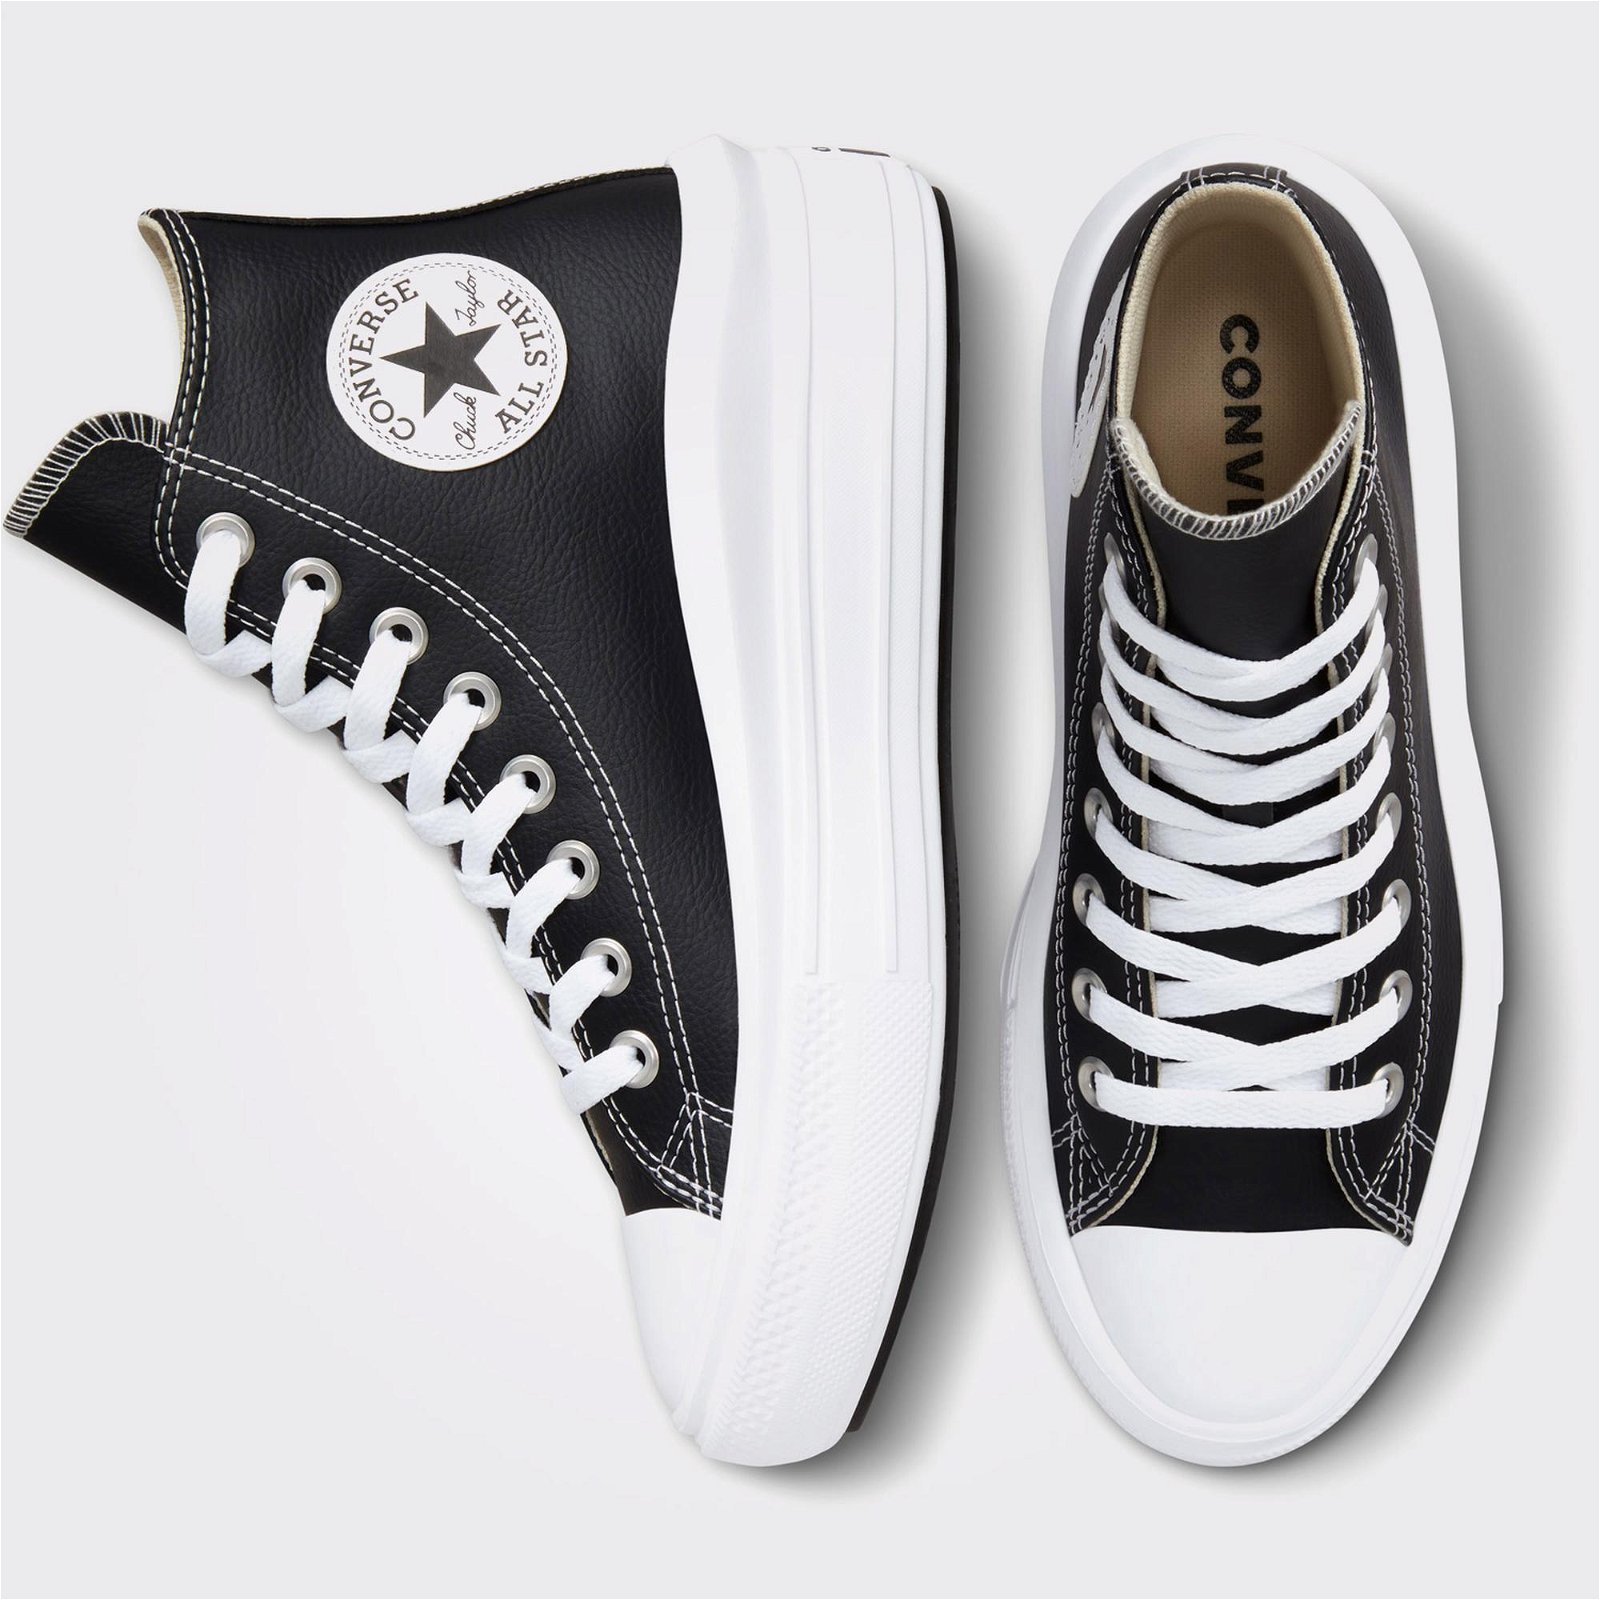 Converse Chuck Taylor All Star Move Platform Foundational Leather Unisex Siyah Sneaker